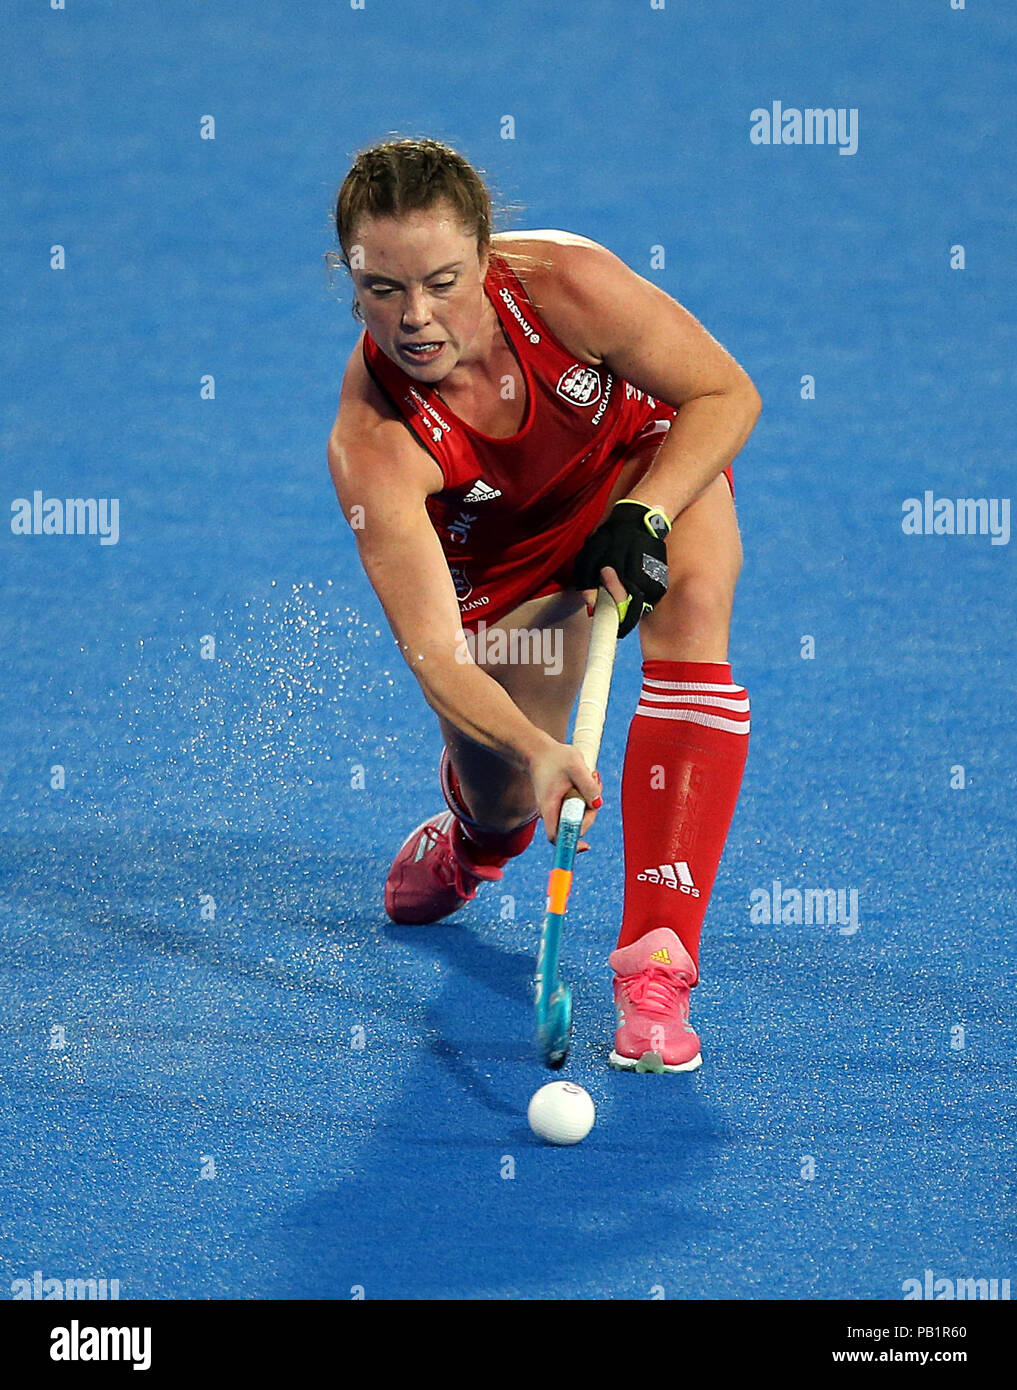 England's Grace Balsdon during the national Vitality Women's Hockey World Cup match at The Lee Valley Hockey and Tennis Centre, London. PRESS ASSOCIATION Photo, Picture date: Wednesday July 25, 2018. Photo credit should read: Steven Paston/PA Wire. Stock Photo